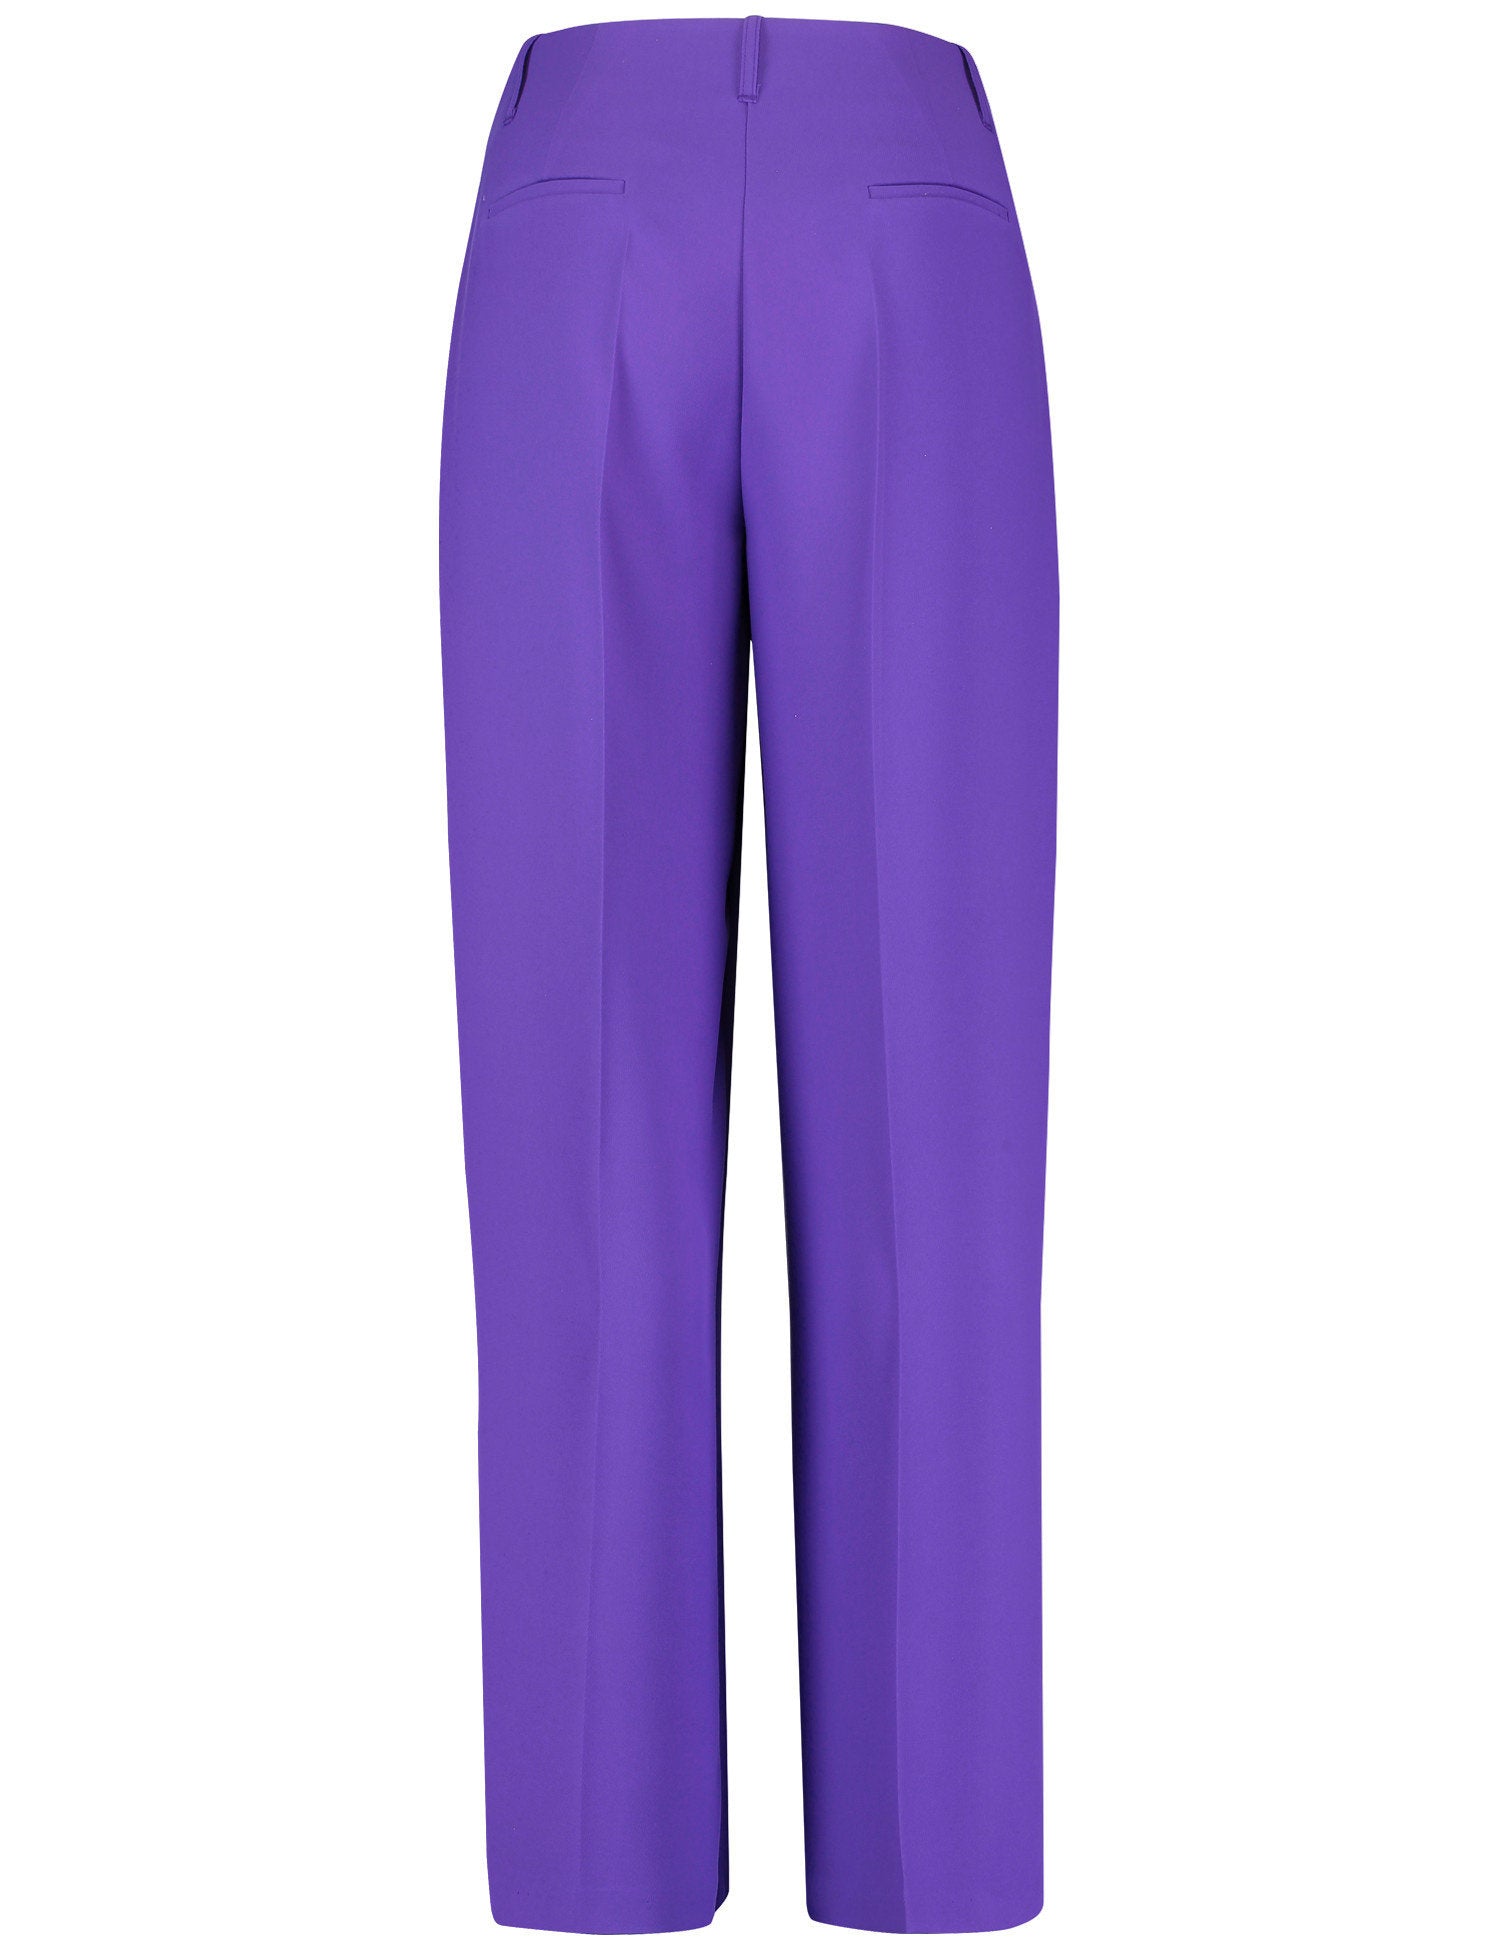 Elegant Wide-Leg Trousers Made Of Stretch Fabric_520303-11054_8810_03